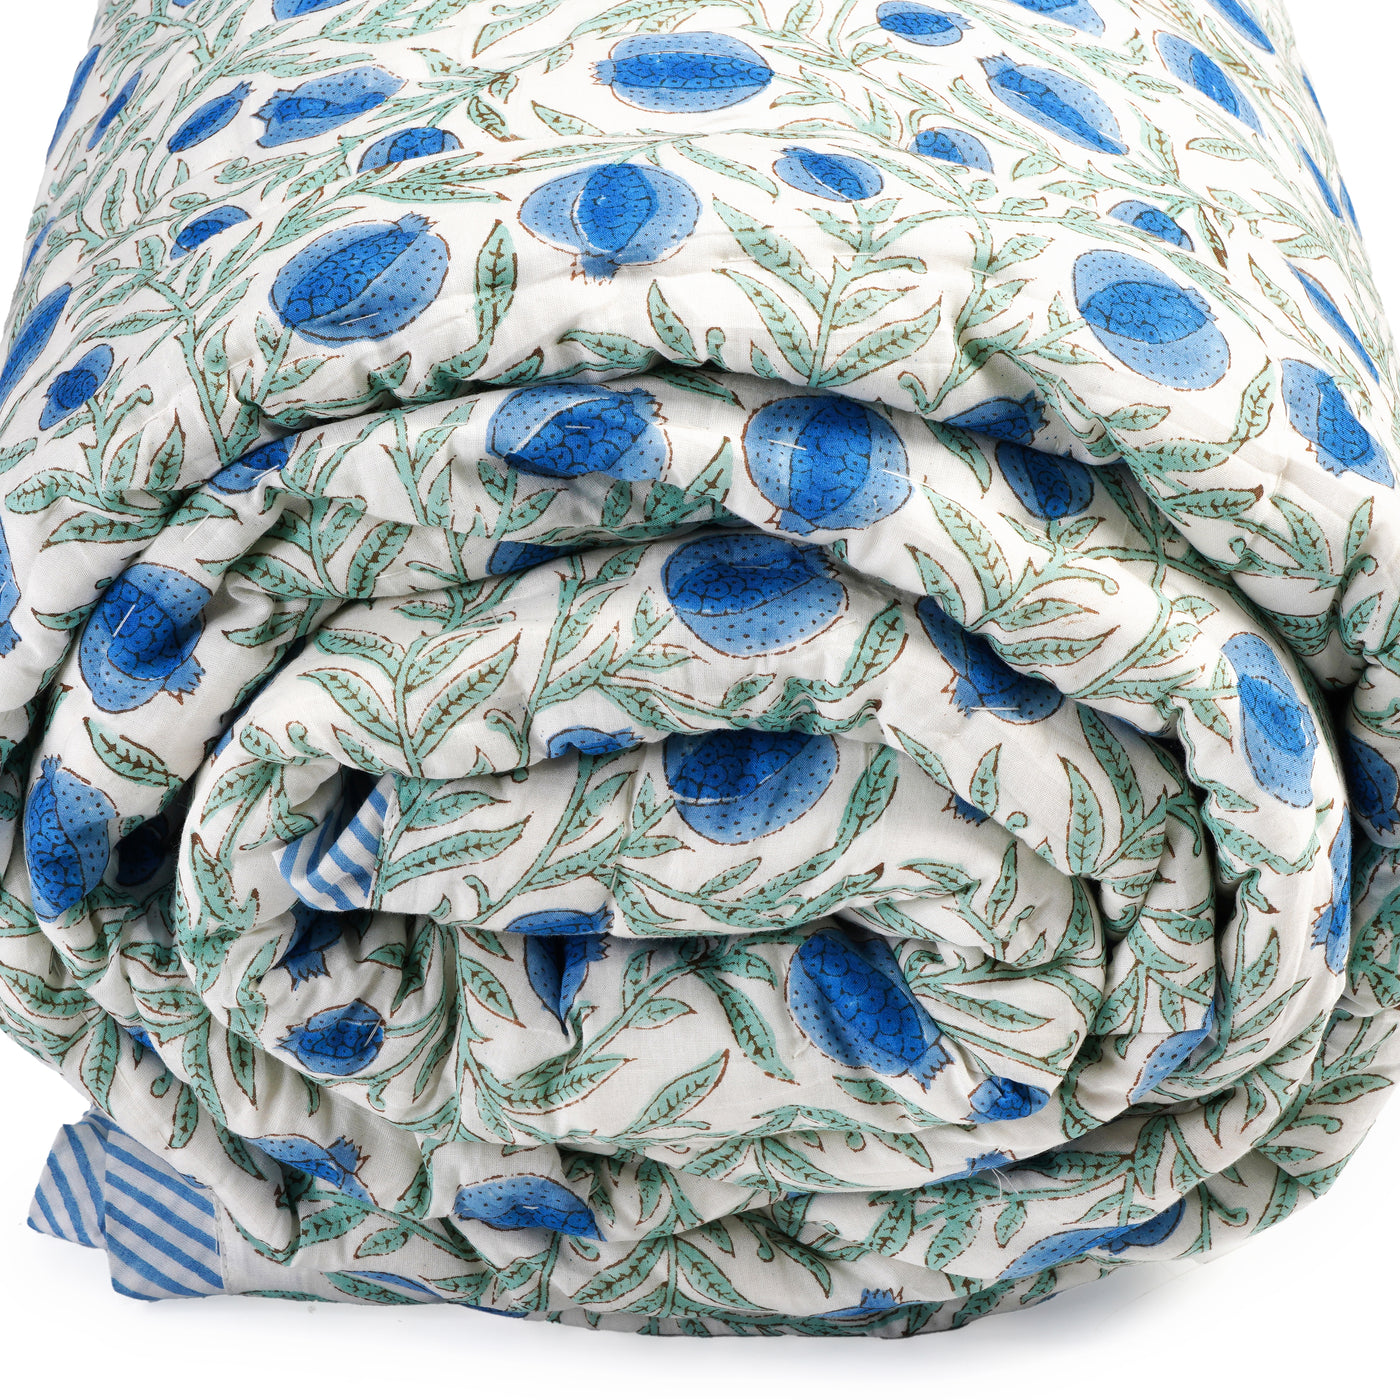 Fabricrush Indian Hand Block Print Quilted Throw Blanket 100% Cotton Quilt, Cover for Couch and Bed